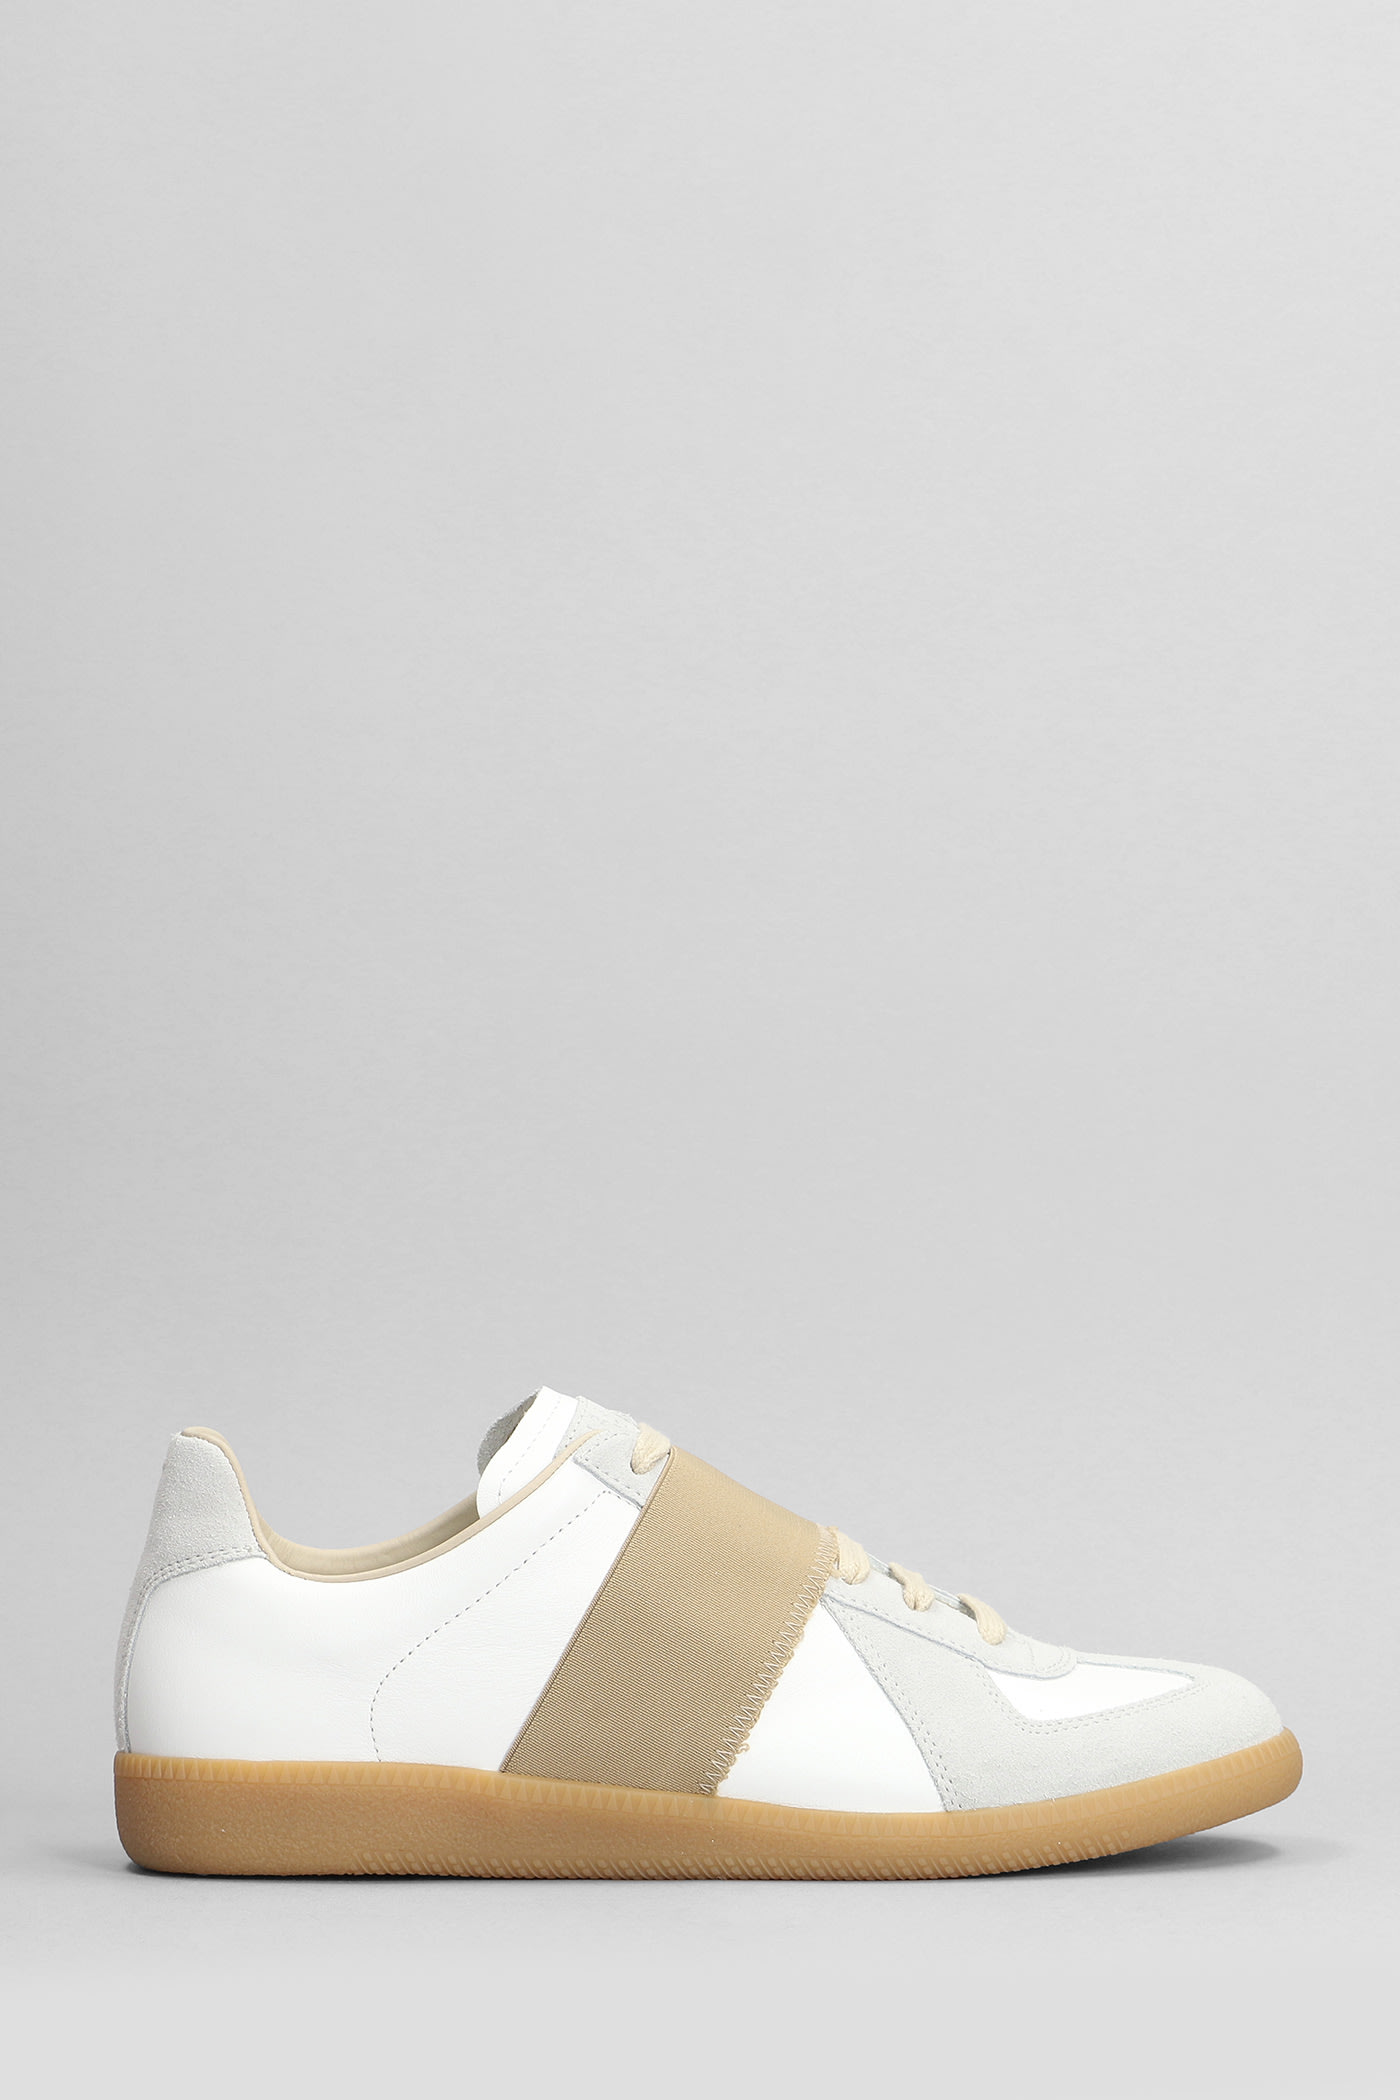 MAISON MARGIELA REPLICA SNEAKERS IN WHITE SUEDE AND LEATHER